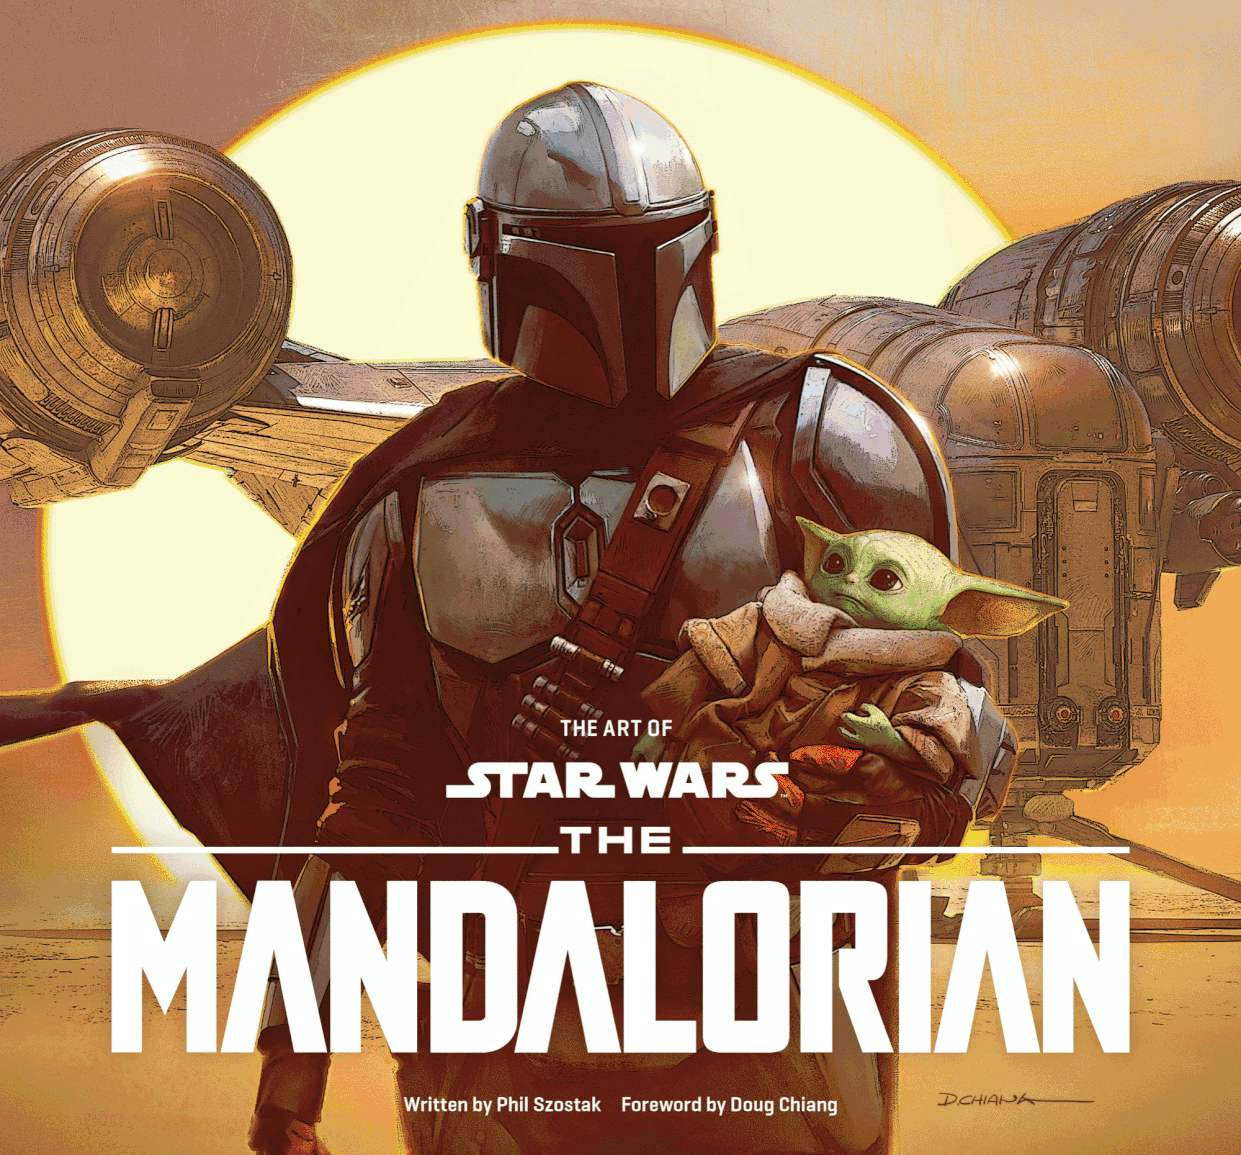 "The Art of Star Wars: The Mandalorian (Season One)" by Phil Szostak (Courtesy of Abrams Books and Lucasfilm Ltd.)